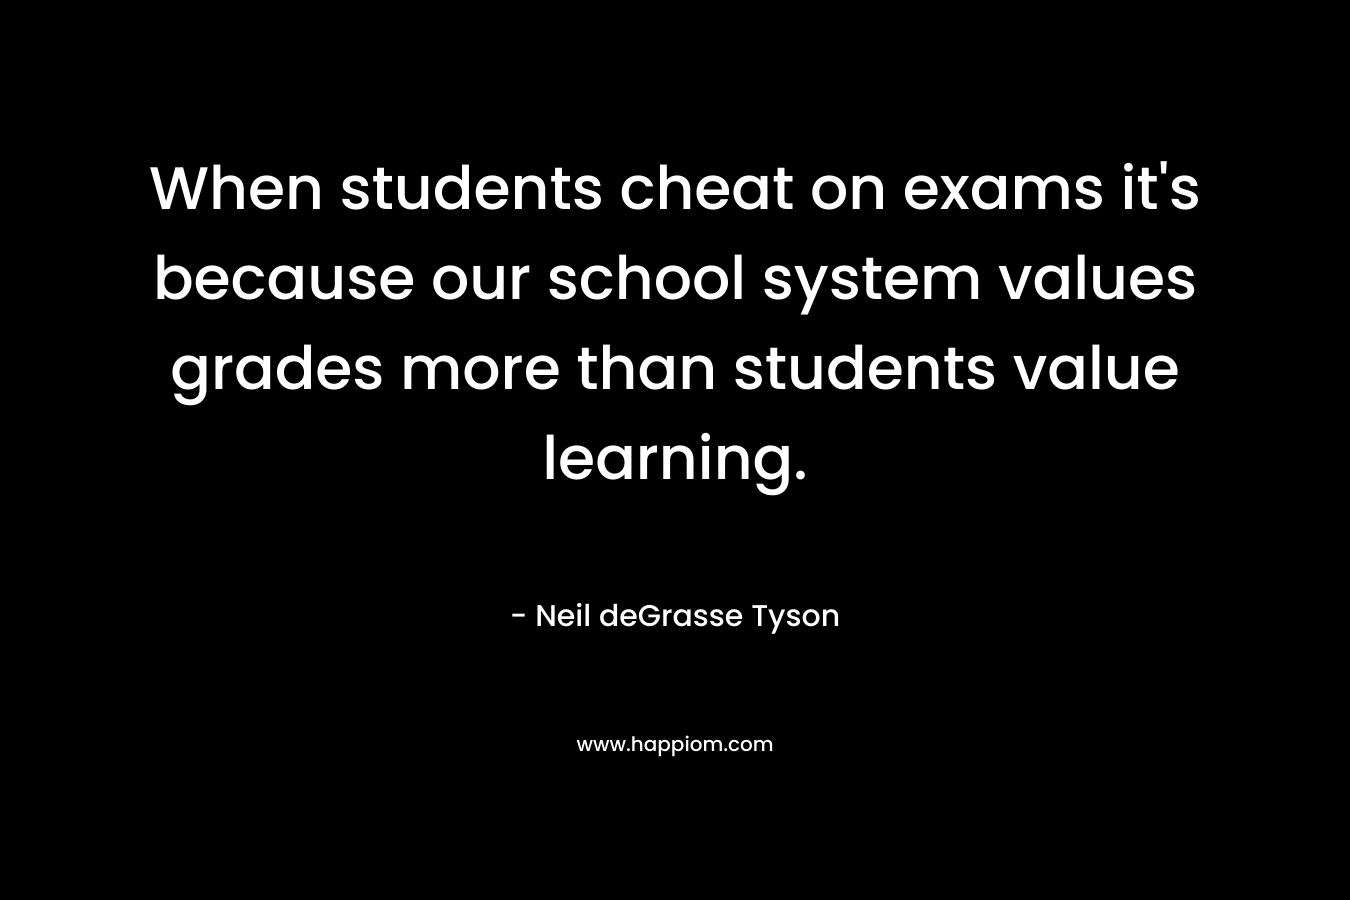 When students cheat on exams it's because our school system values grades more than students value learning.